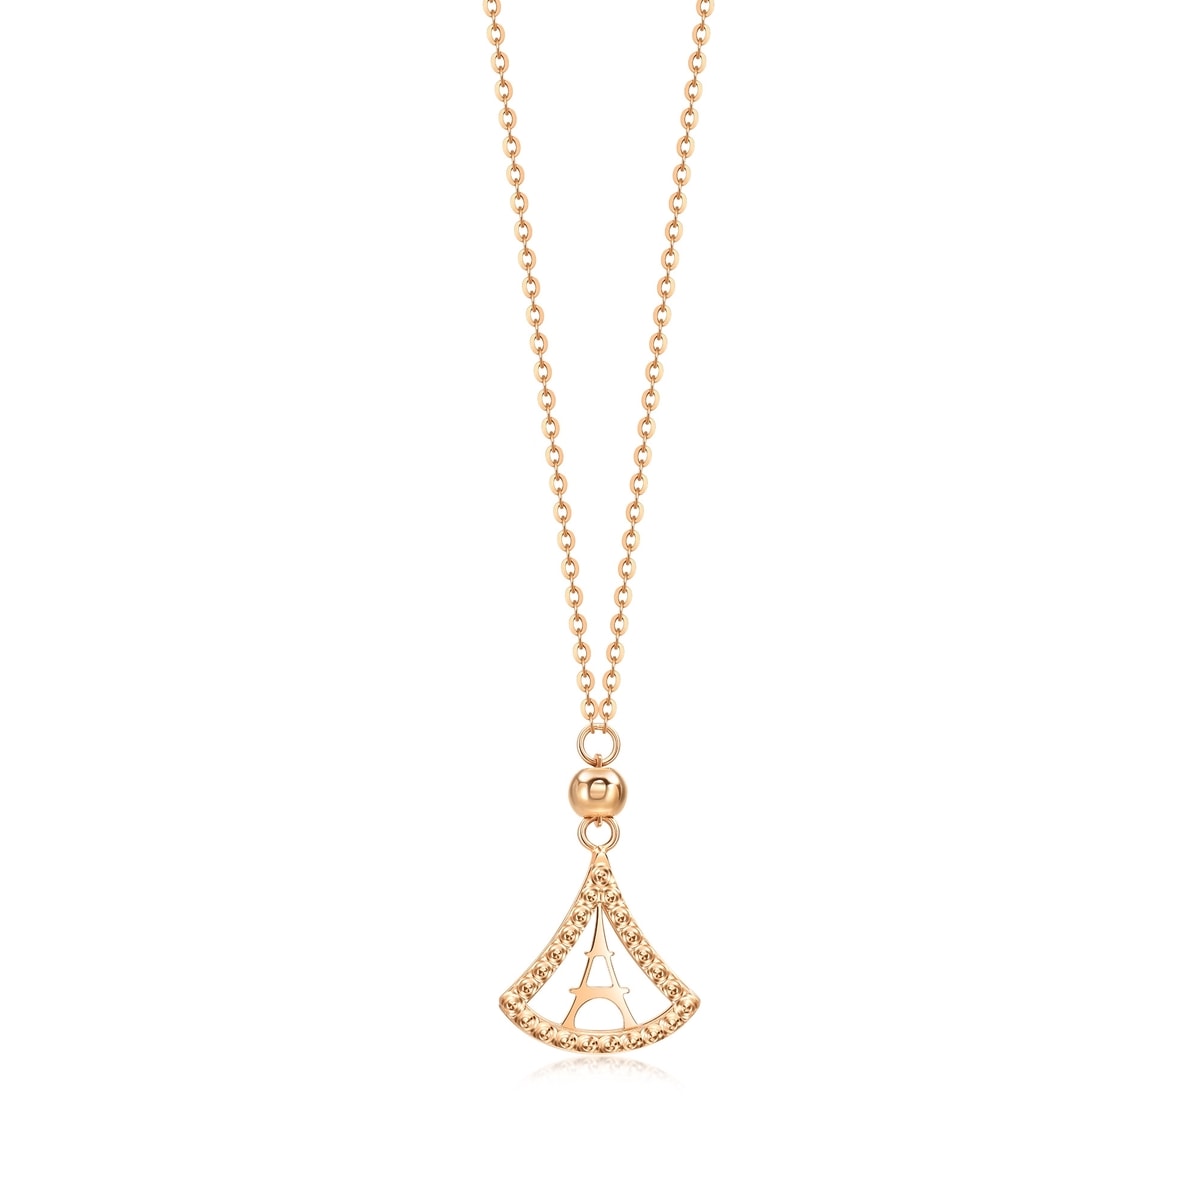 Minty Collection 18K Rose Gold Necklace - 94375N | Chow Sang Sang Jewellery